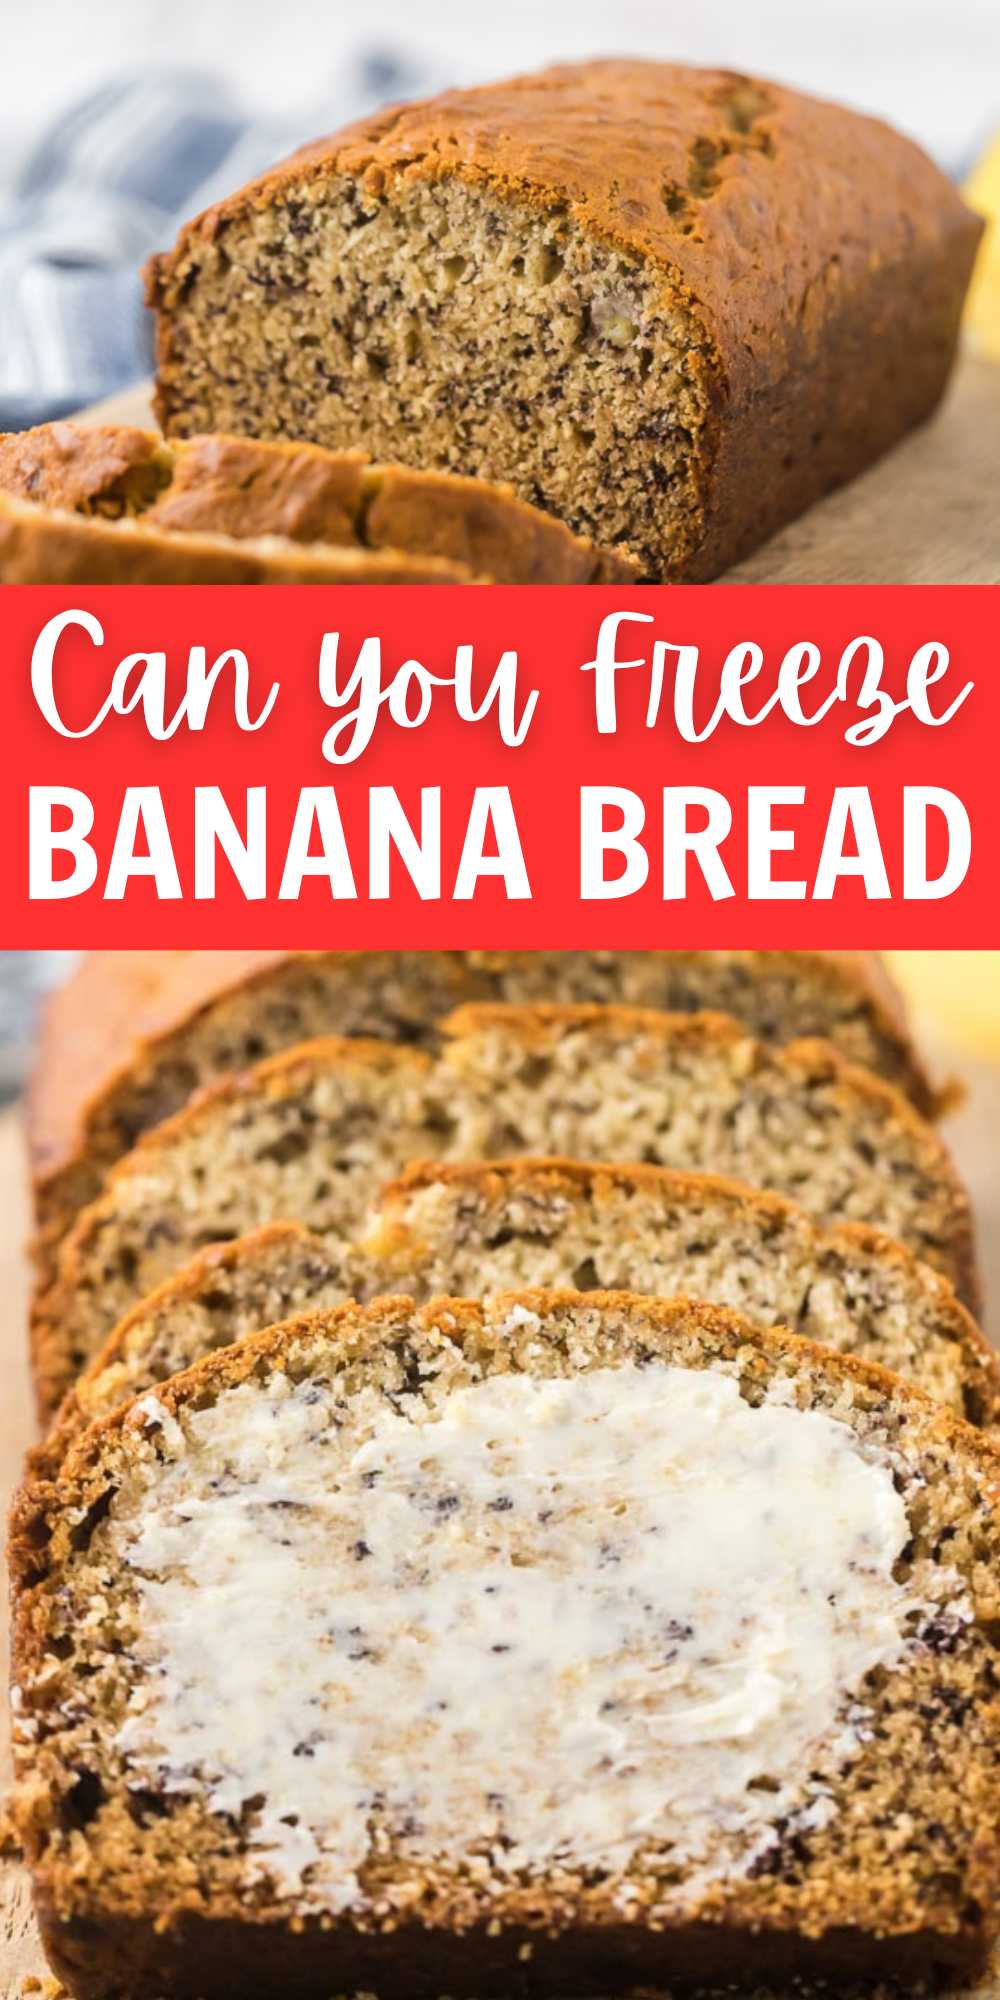 Many people admire a slice of banana bread for its enticing taste and comforting scent. But "can you freeze banana bread"? Freezing it is a great alternative, as it can stay fresh for up to 3 months in the freezer. Store the banana bread properly to ensure you can still enjoy. #eatingonadime #canyoufreezebananabread #bananabread